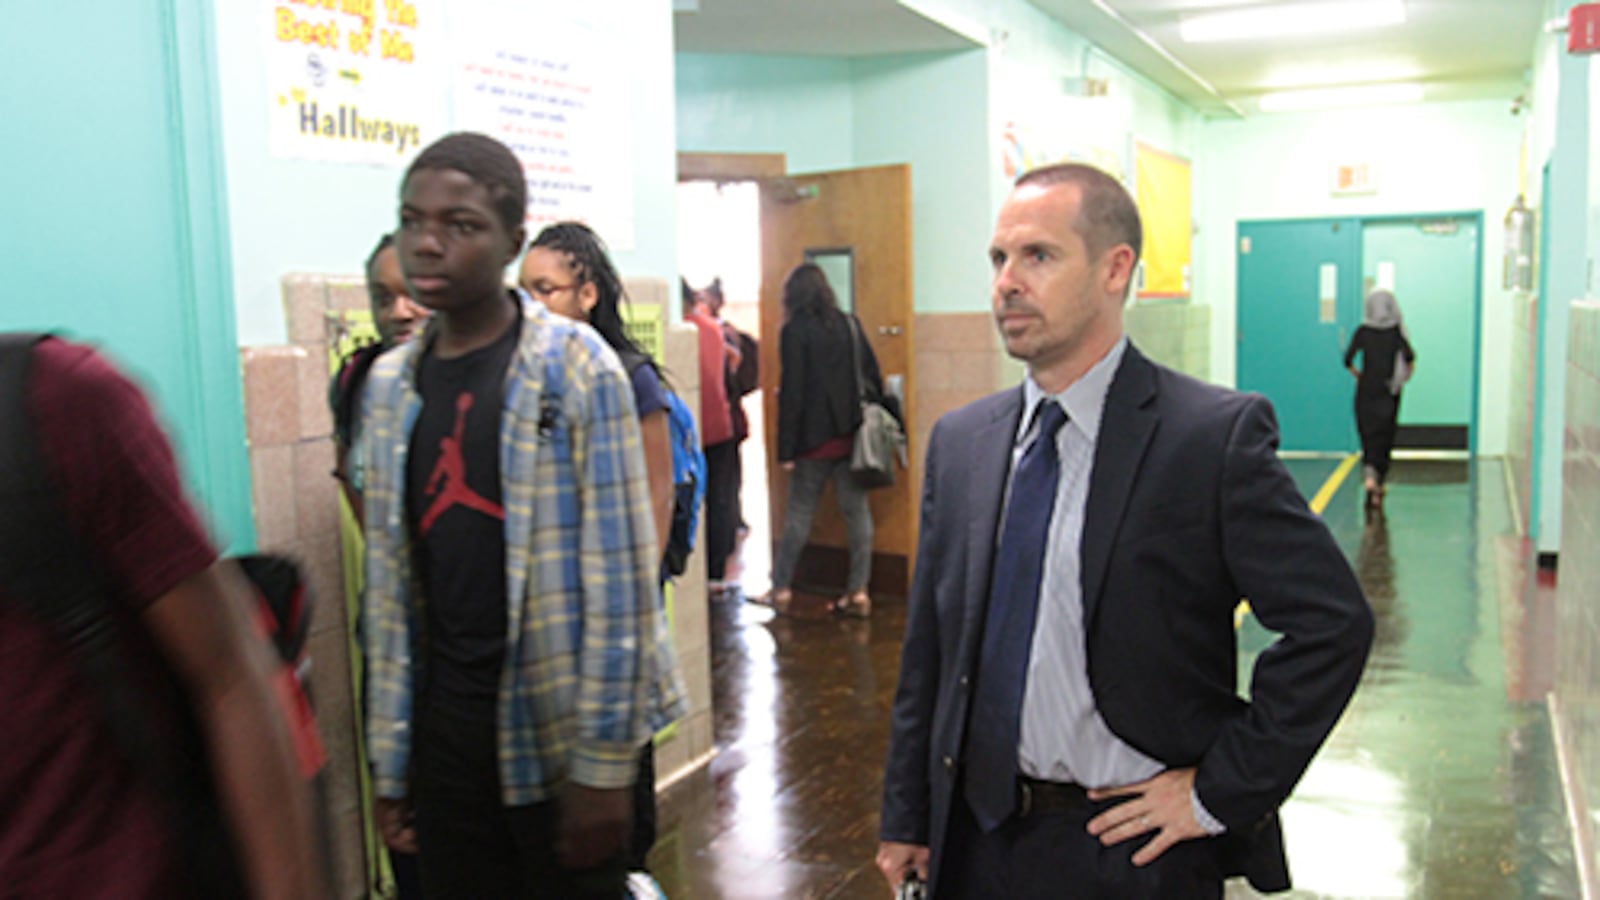 Sean Licata, who is starting his fourth year as principal of the School of Diplomacy in the Bronx, watched over his students on the first day of school.